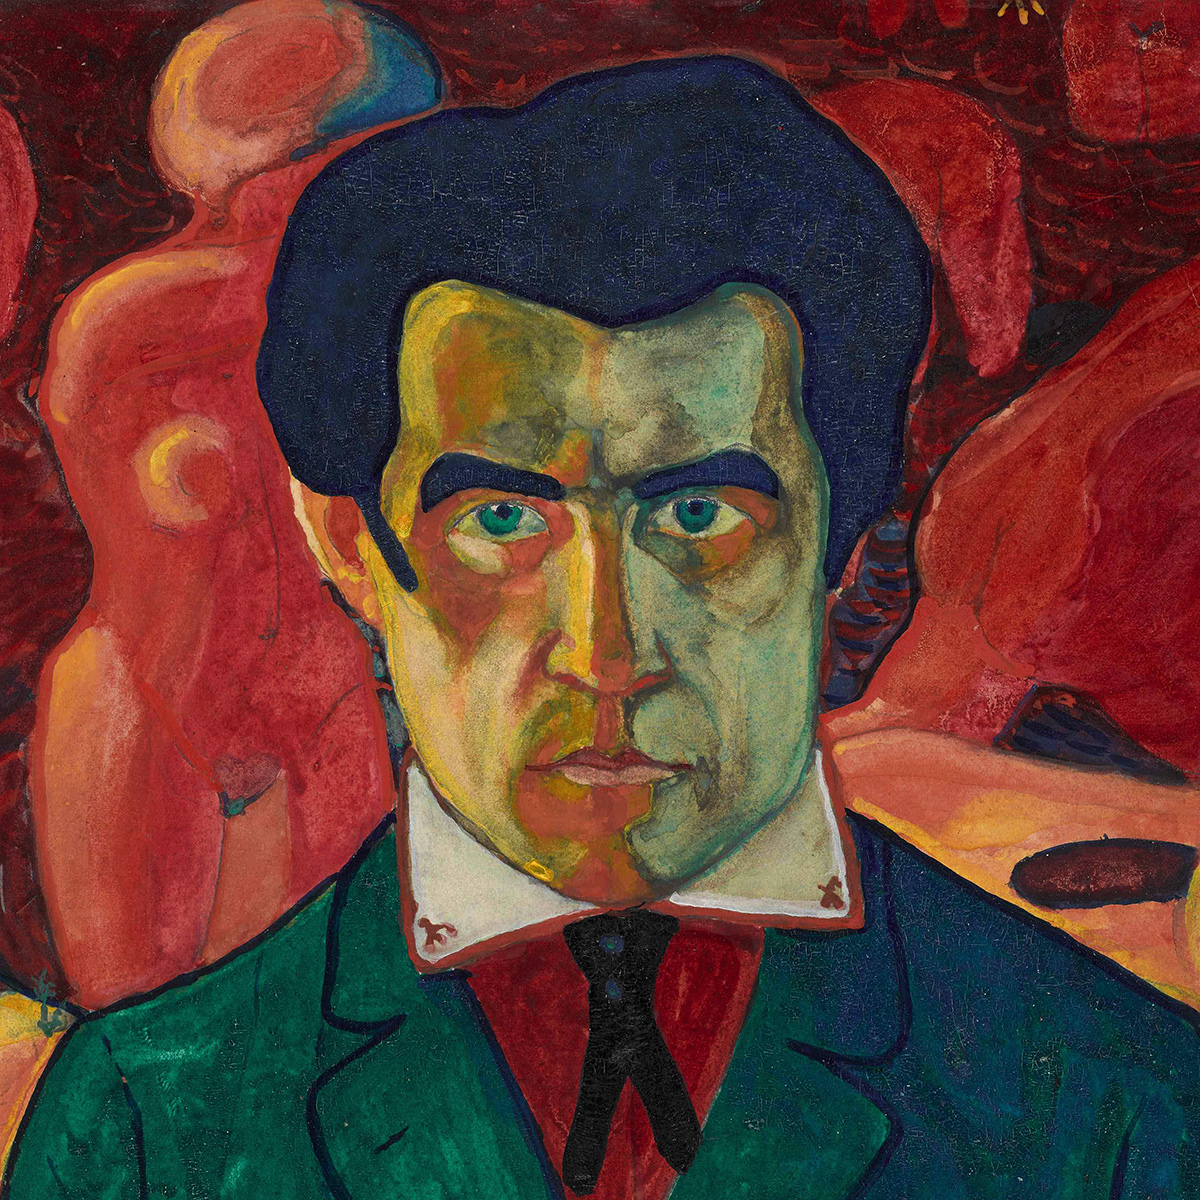 Download Kazimir Malevich - "Art does not need us, and it never did"